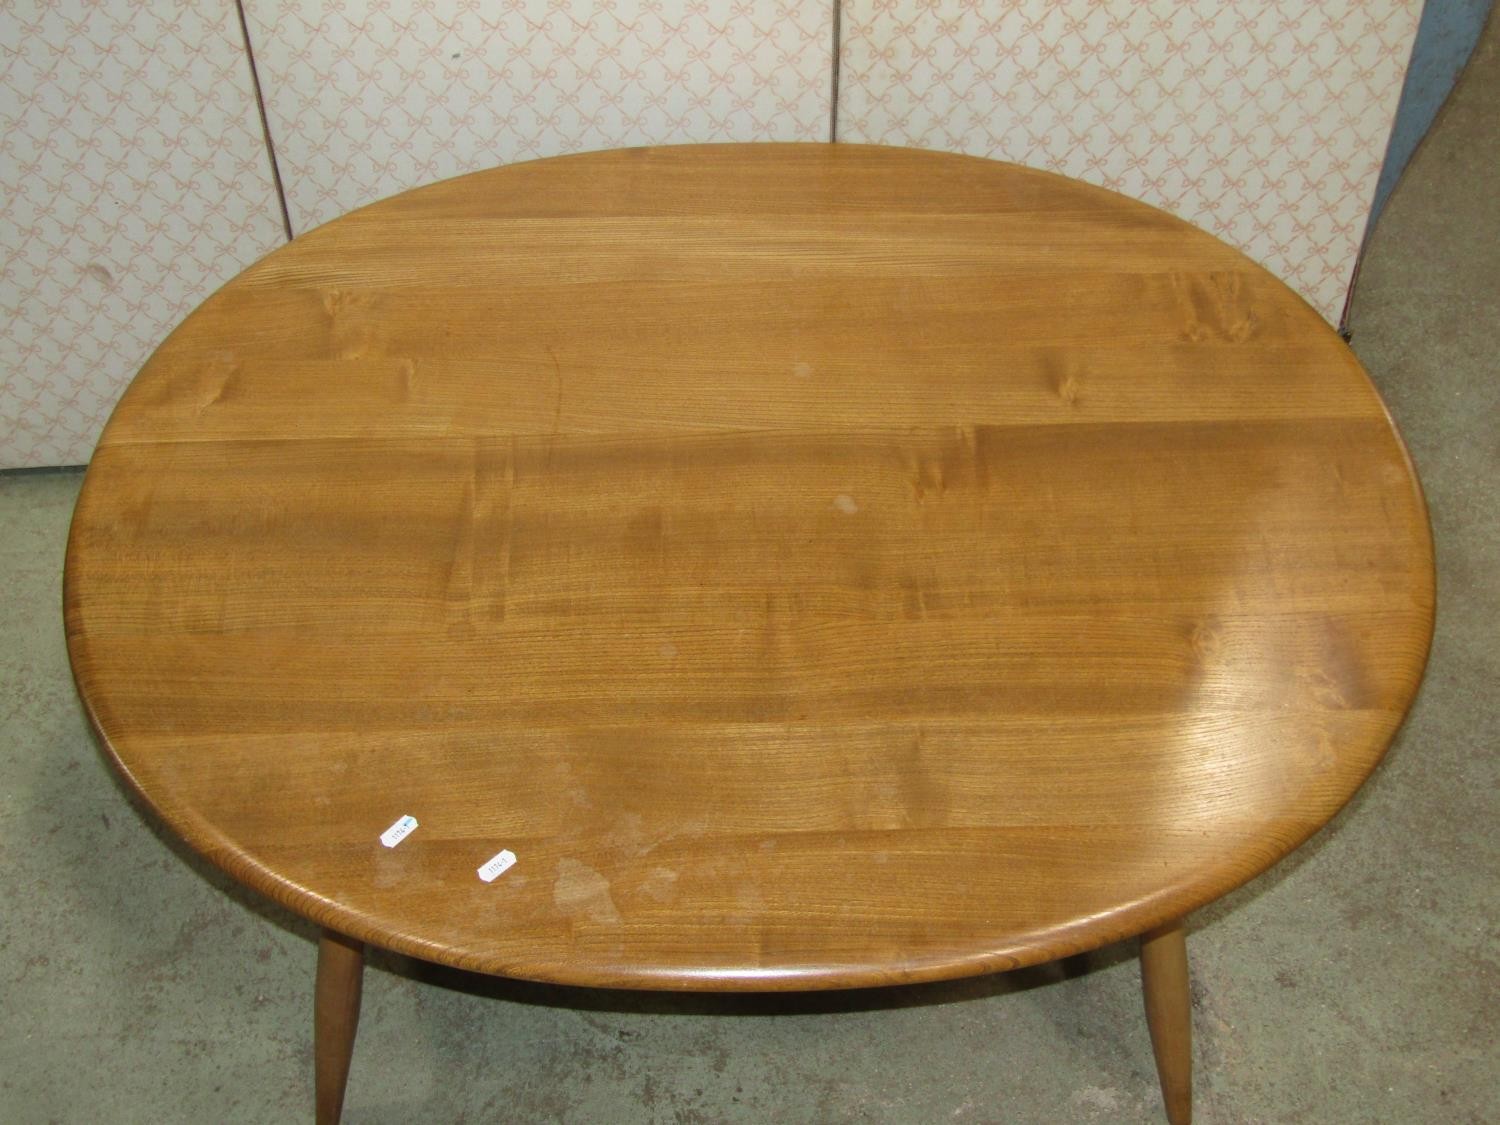 An Ercol occasional table principally in elm, the oval top 100cm max - Image 2 of 3